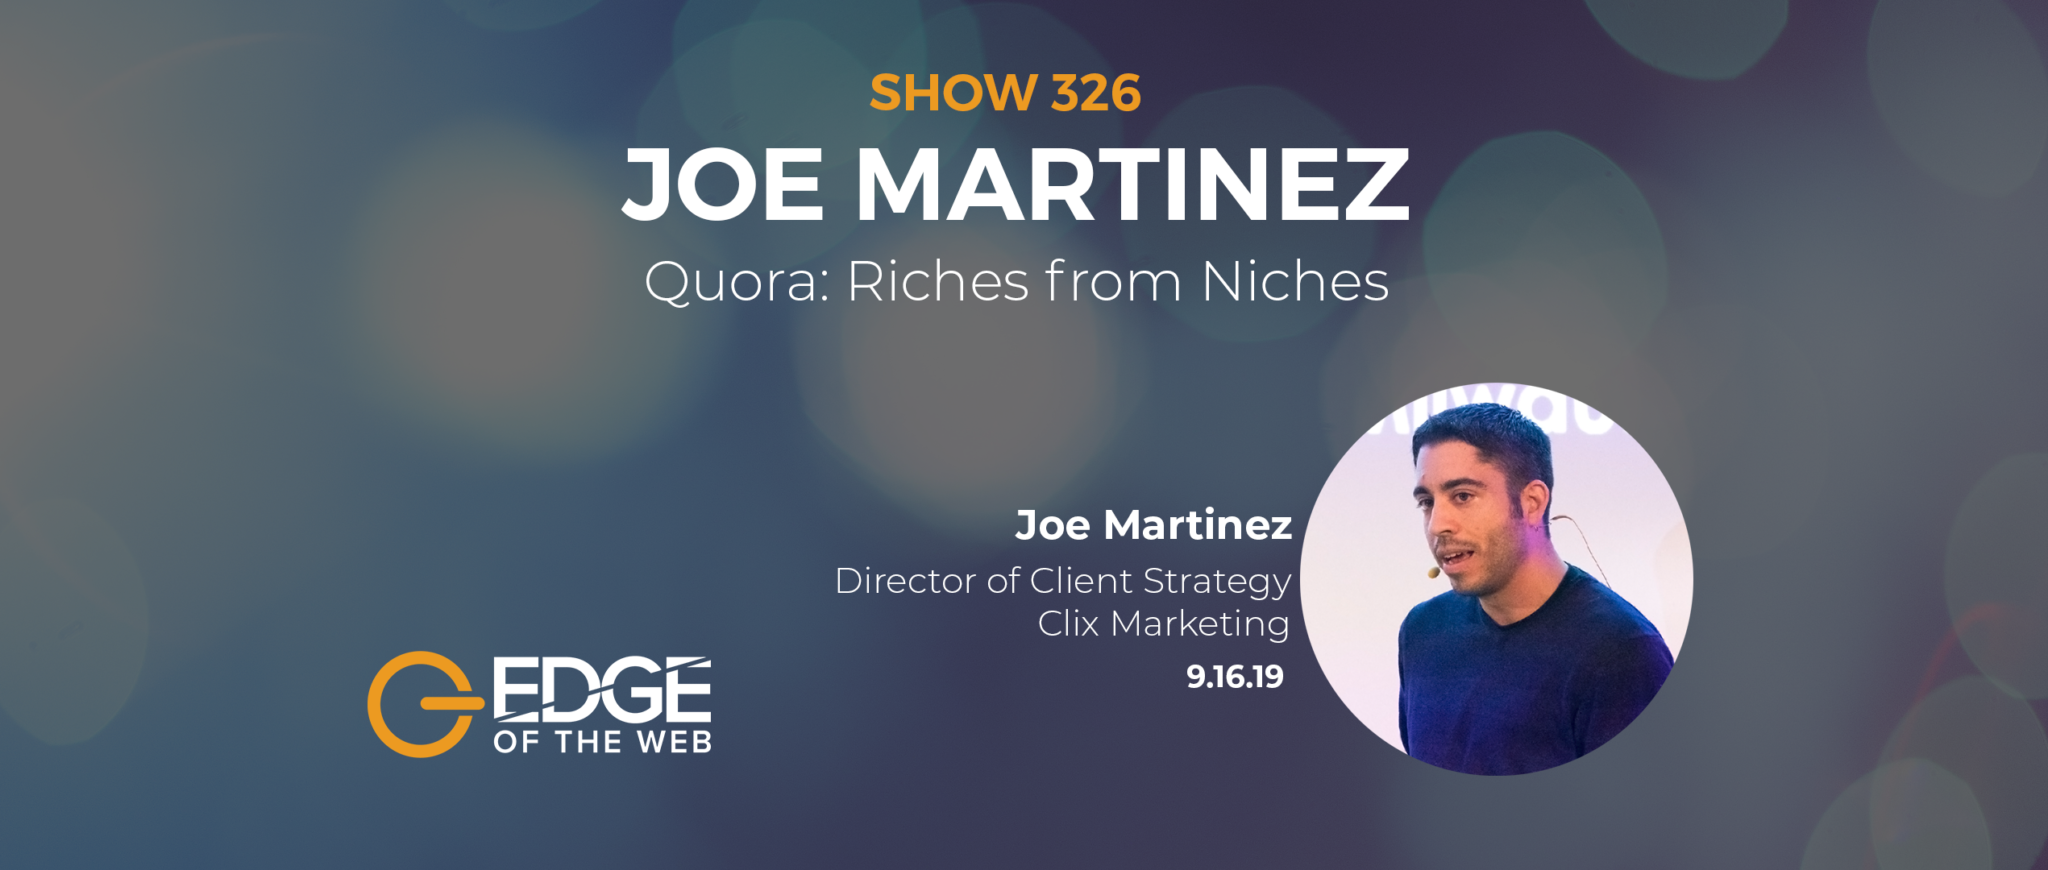 Show 326: Quora: Riches from Niches, featuring Joe Martinez